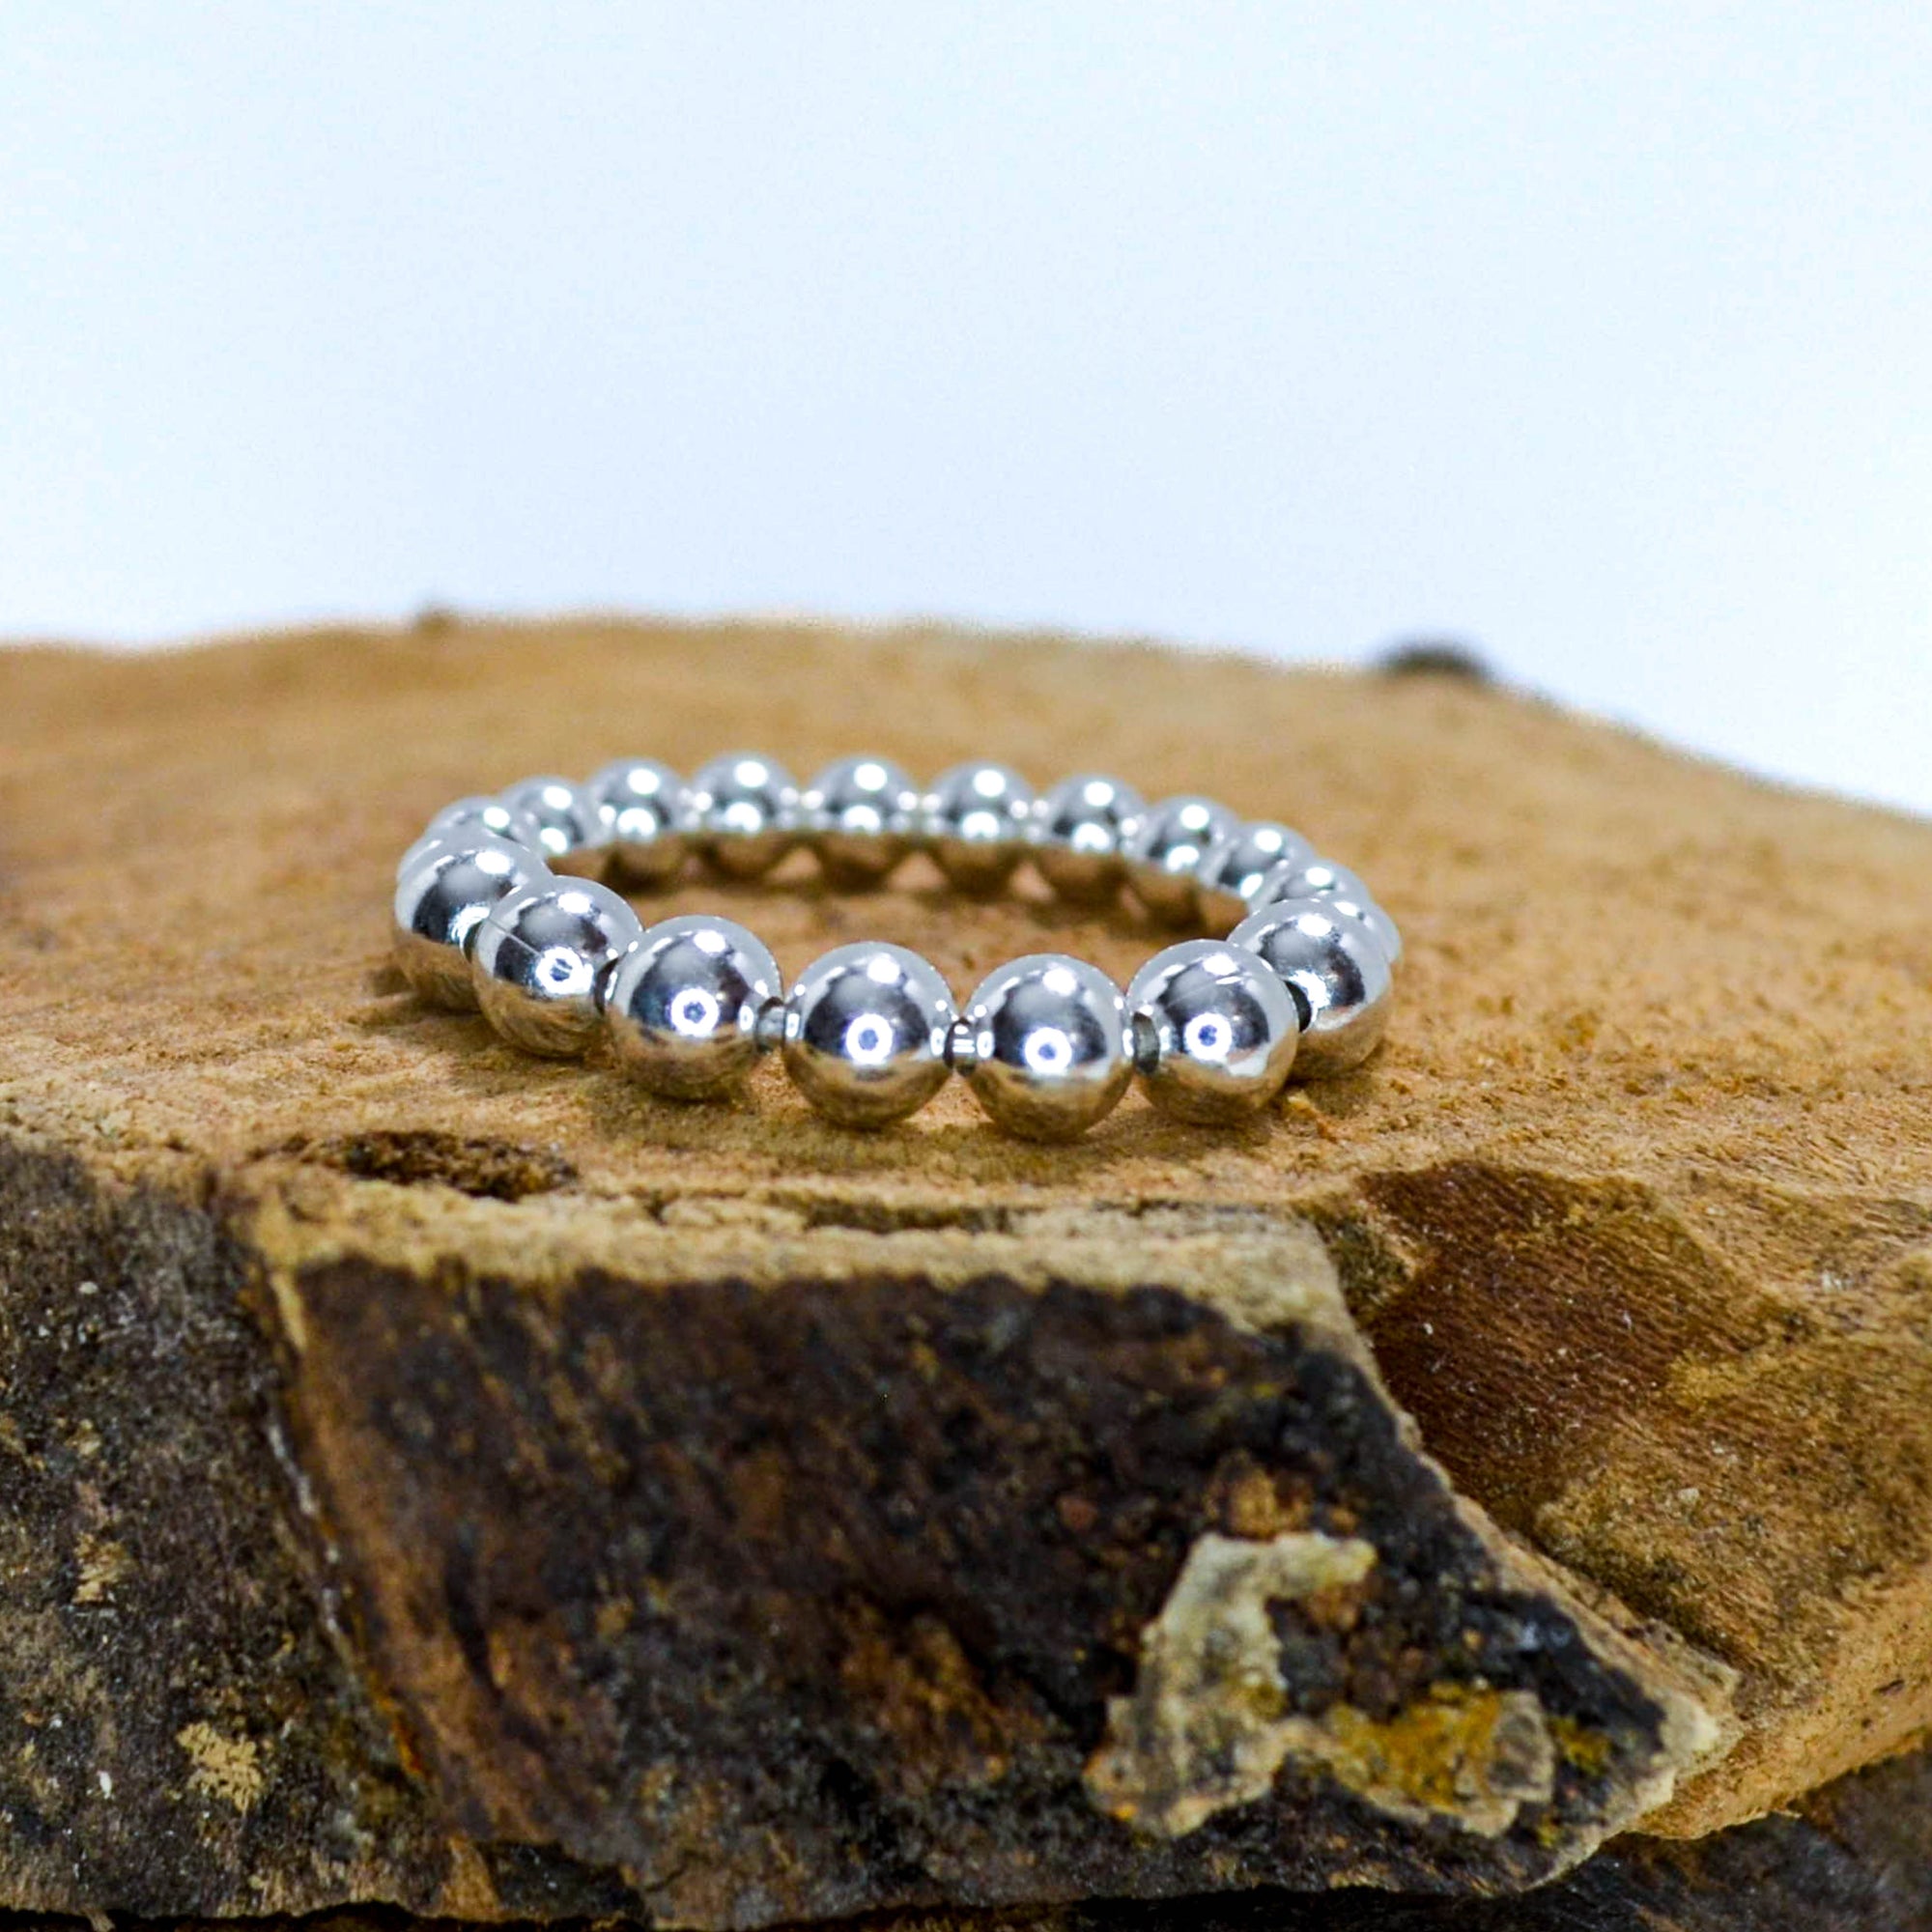 Ring made of small silver balls sitting on a piece of wood